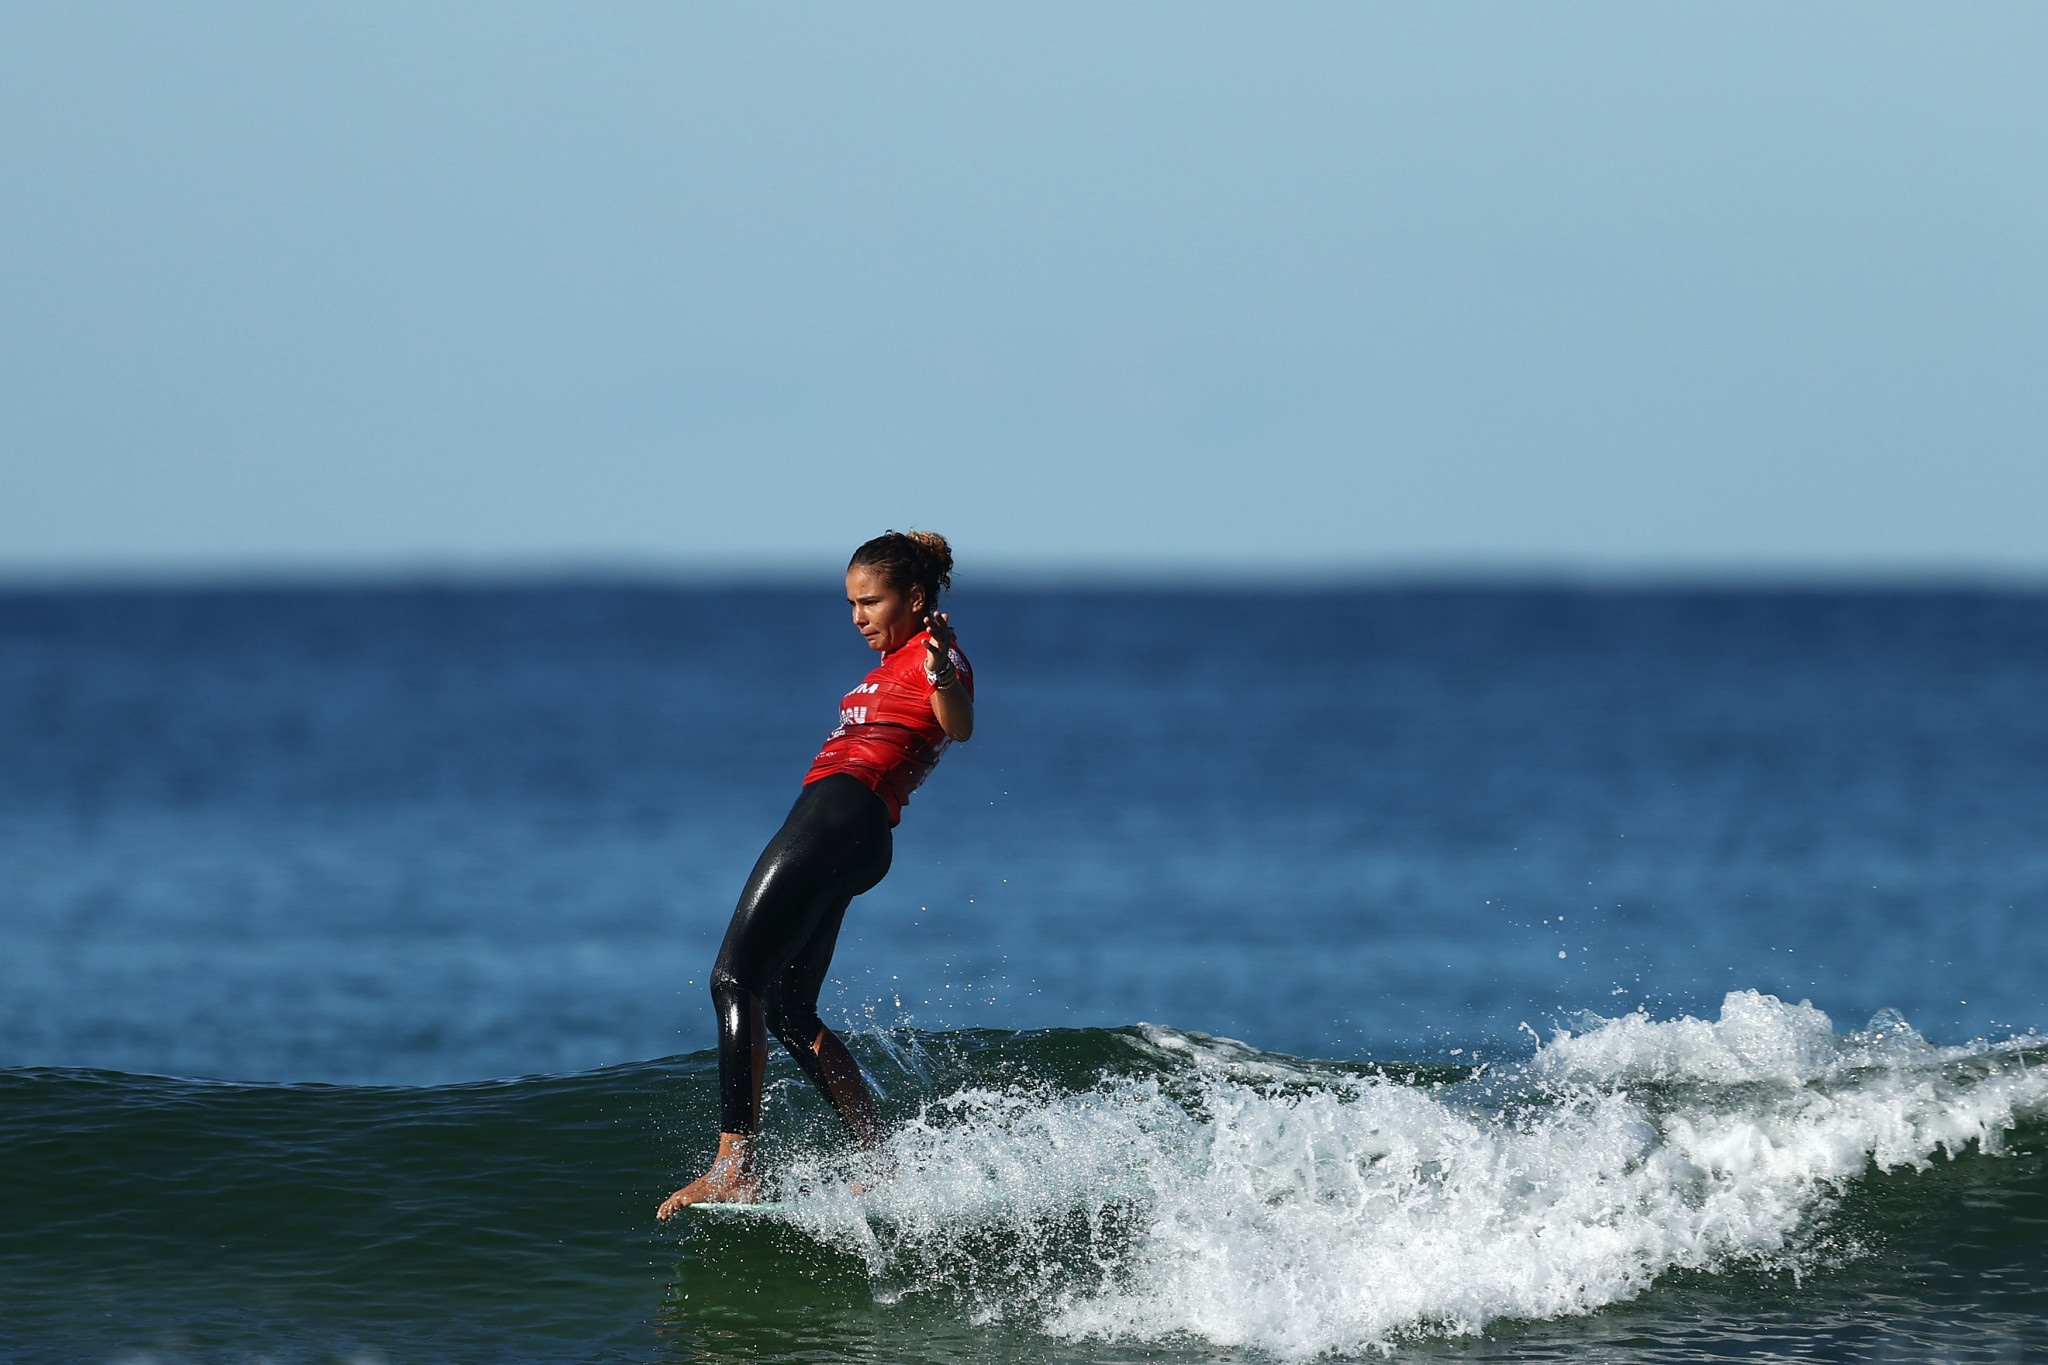 Alice Le Moigne won the women's title at the ISA World Longboard Championships in Surf City ©Getty Images